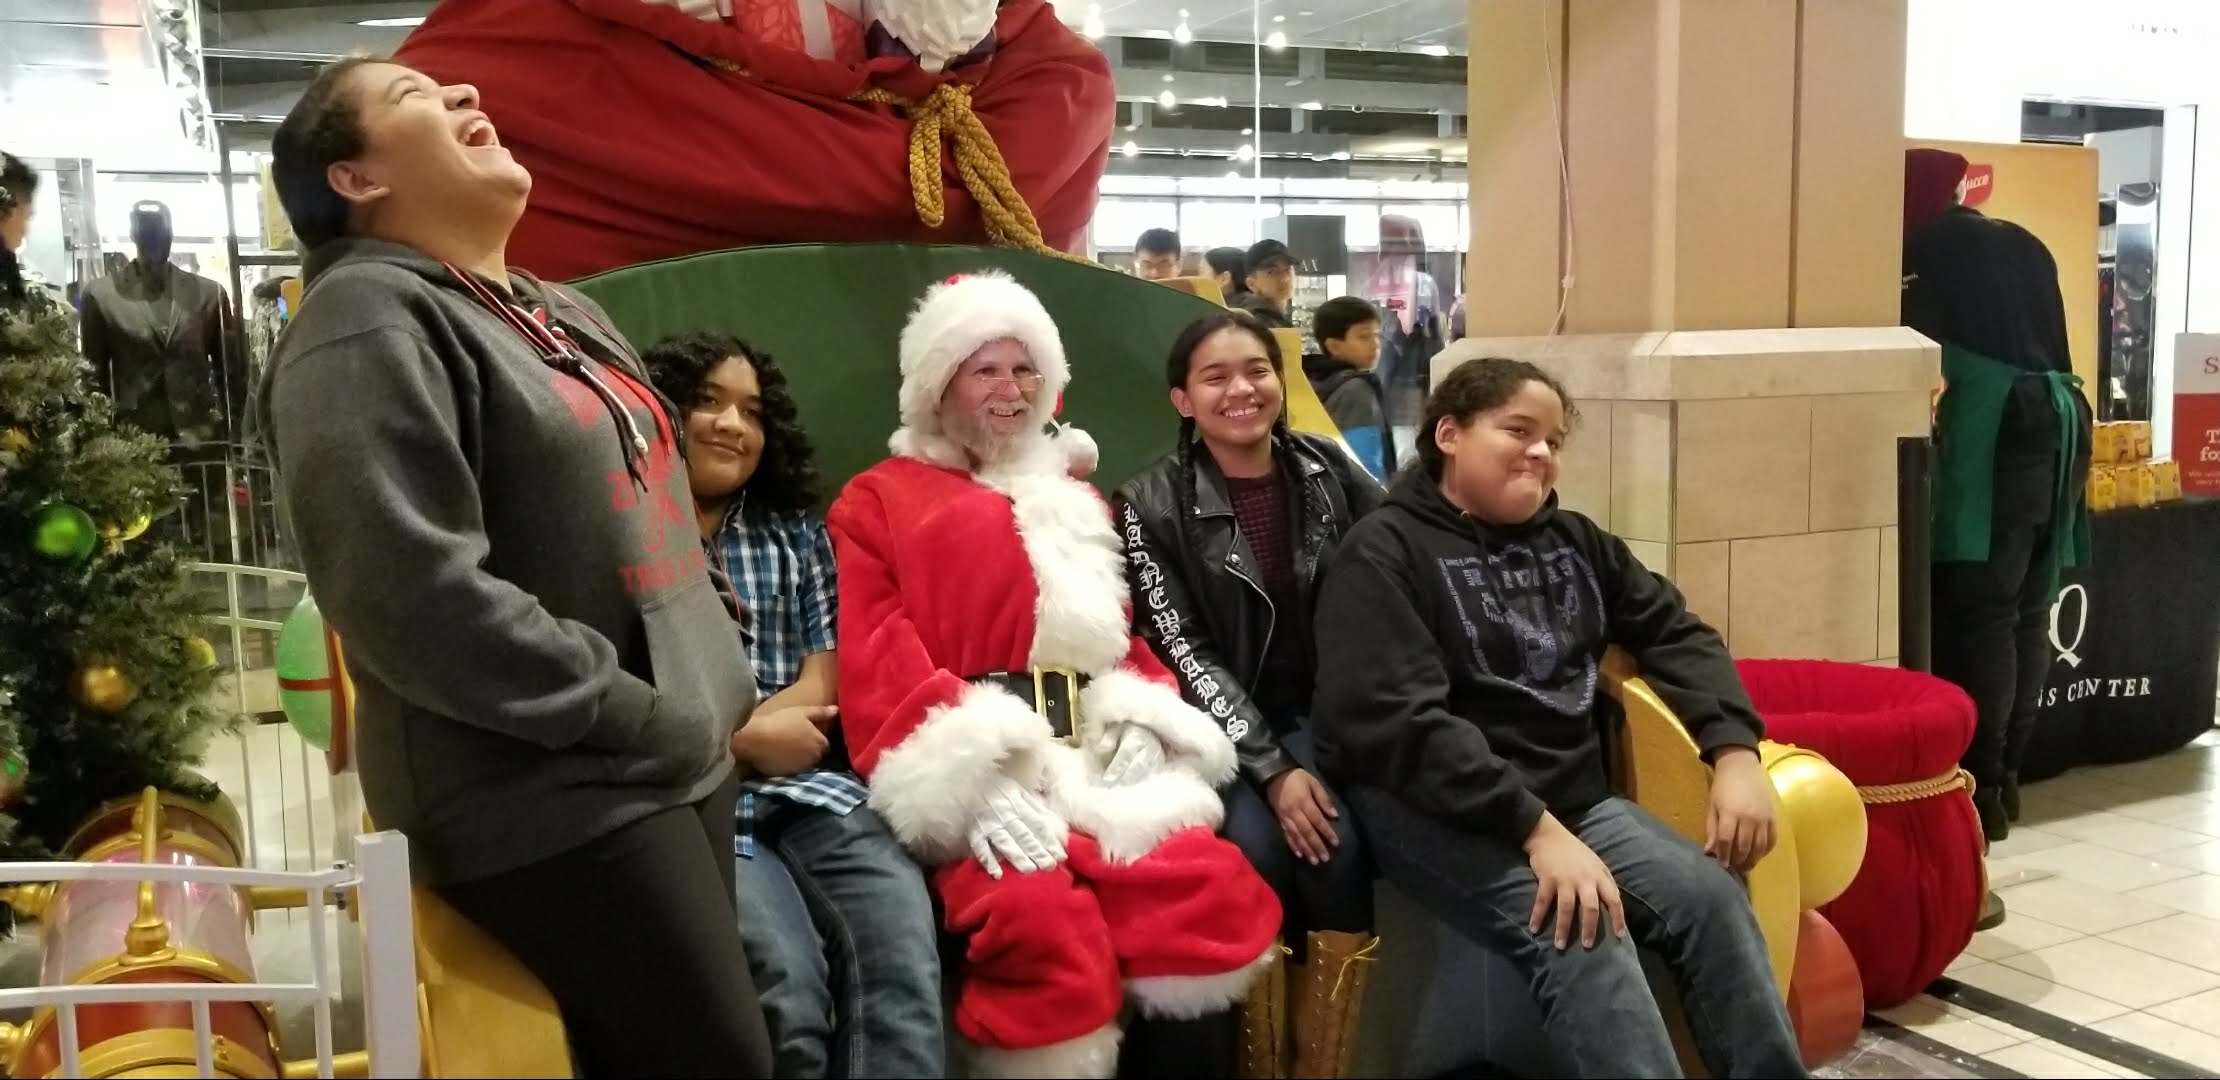 Visiting Santa is a Great Family Tradition